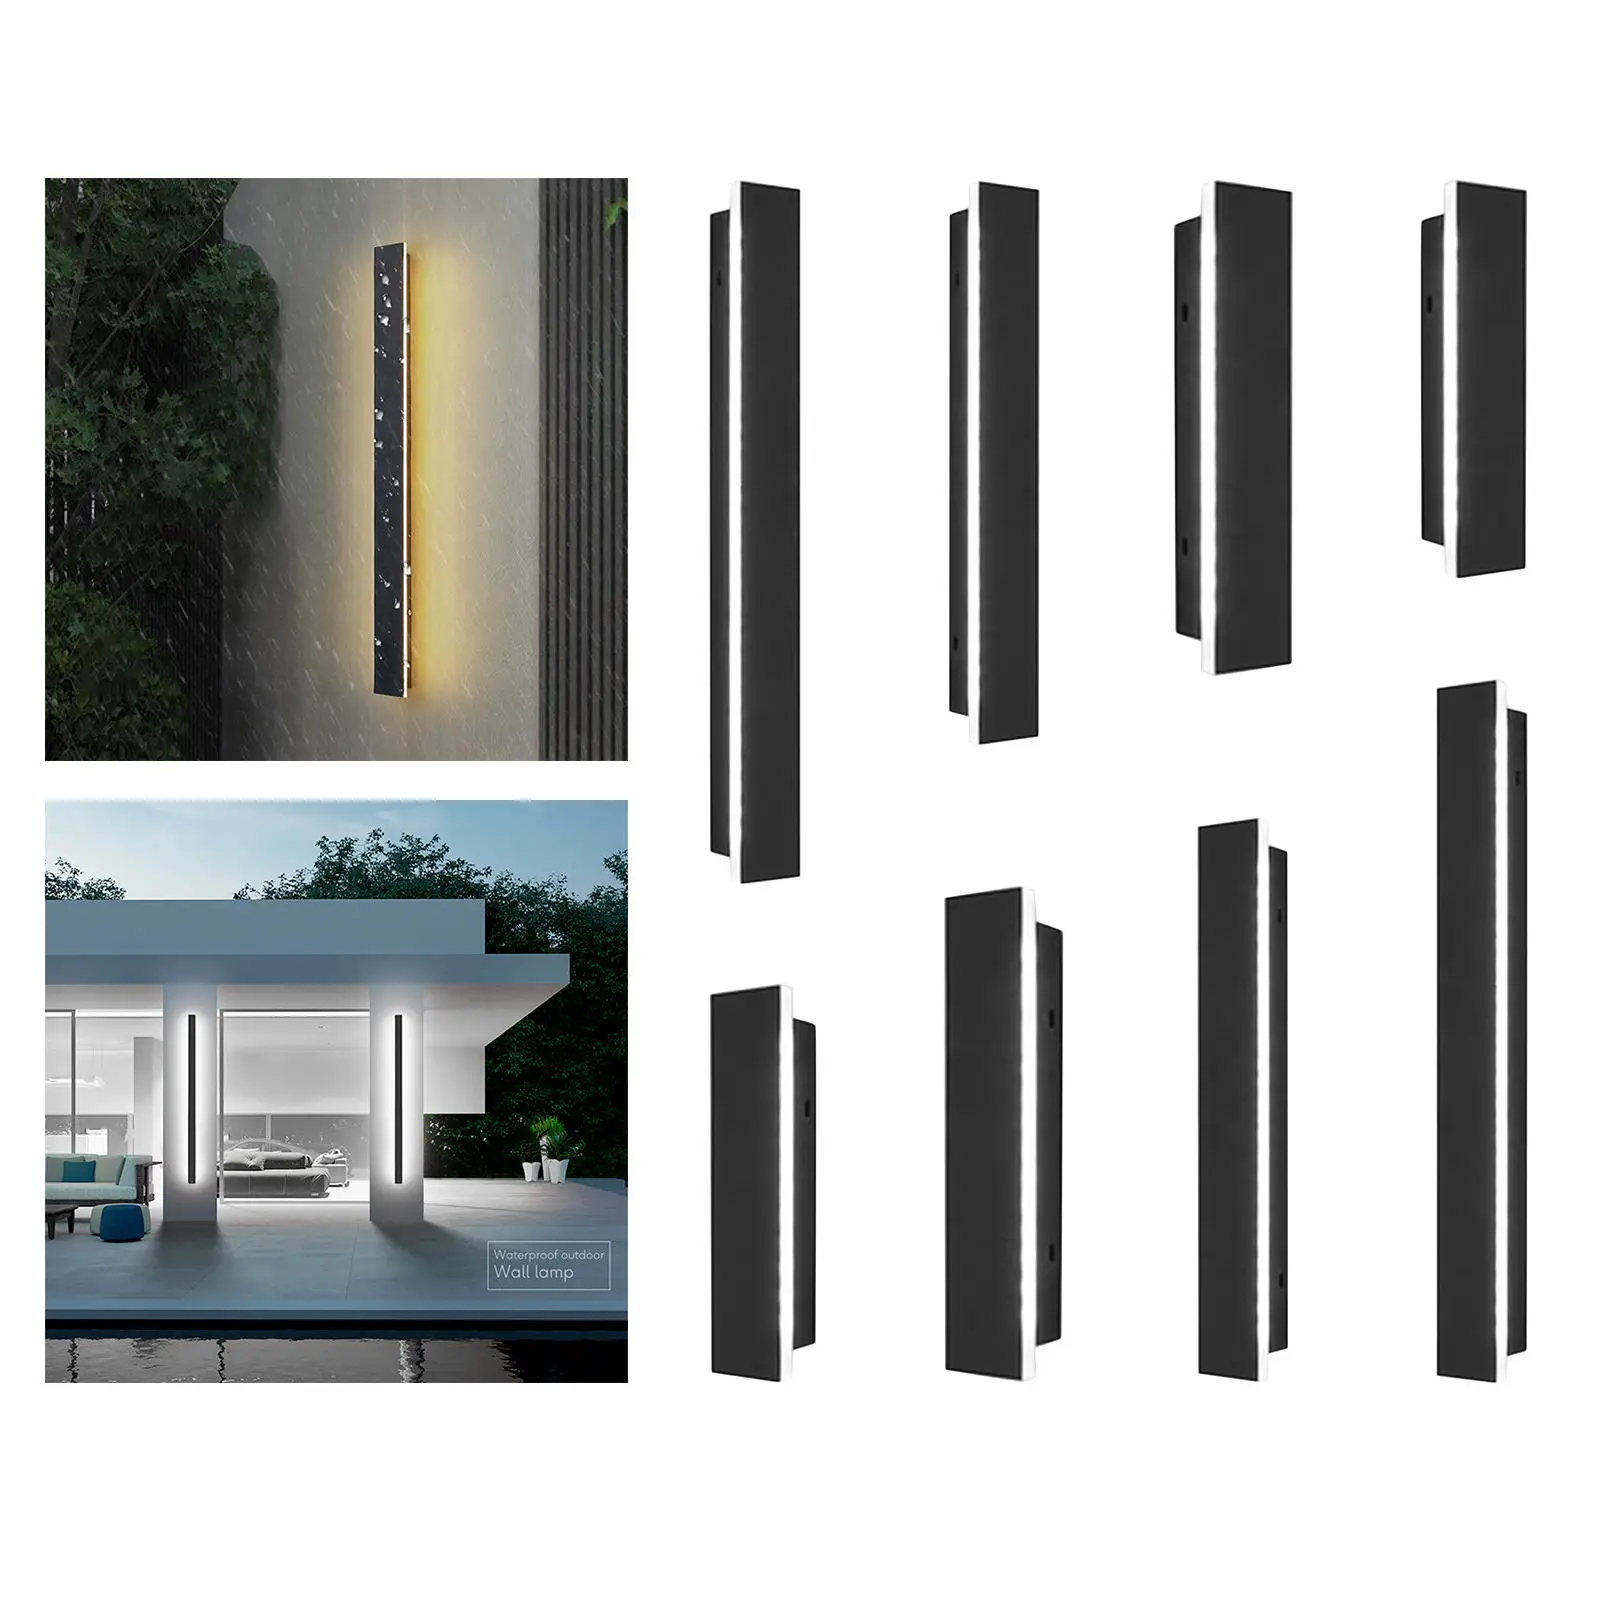 Outdoor Long Strip Modern LED Wall Lighting Fixture Lamps, Elegant Frosted Black Iron Body IP65 Waterproof Anti Rust